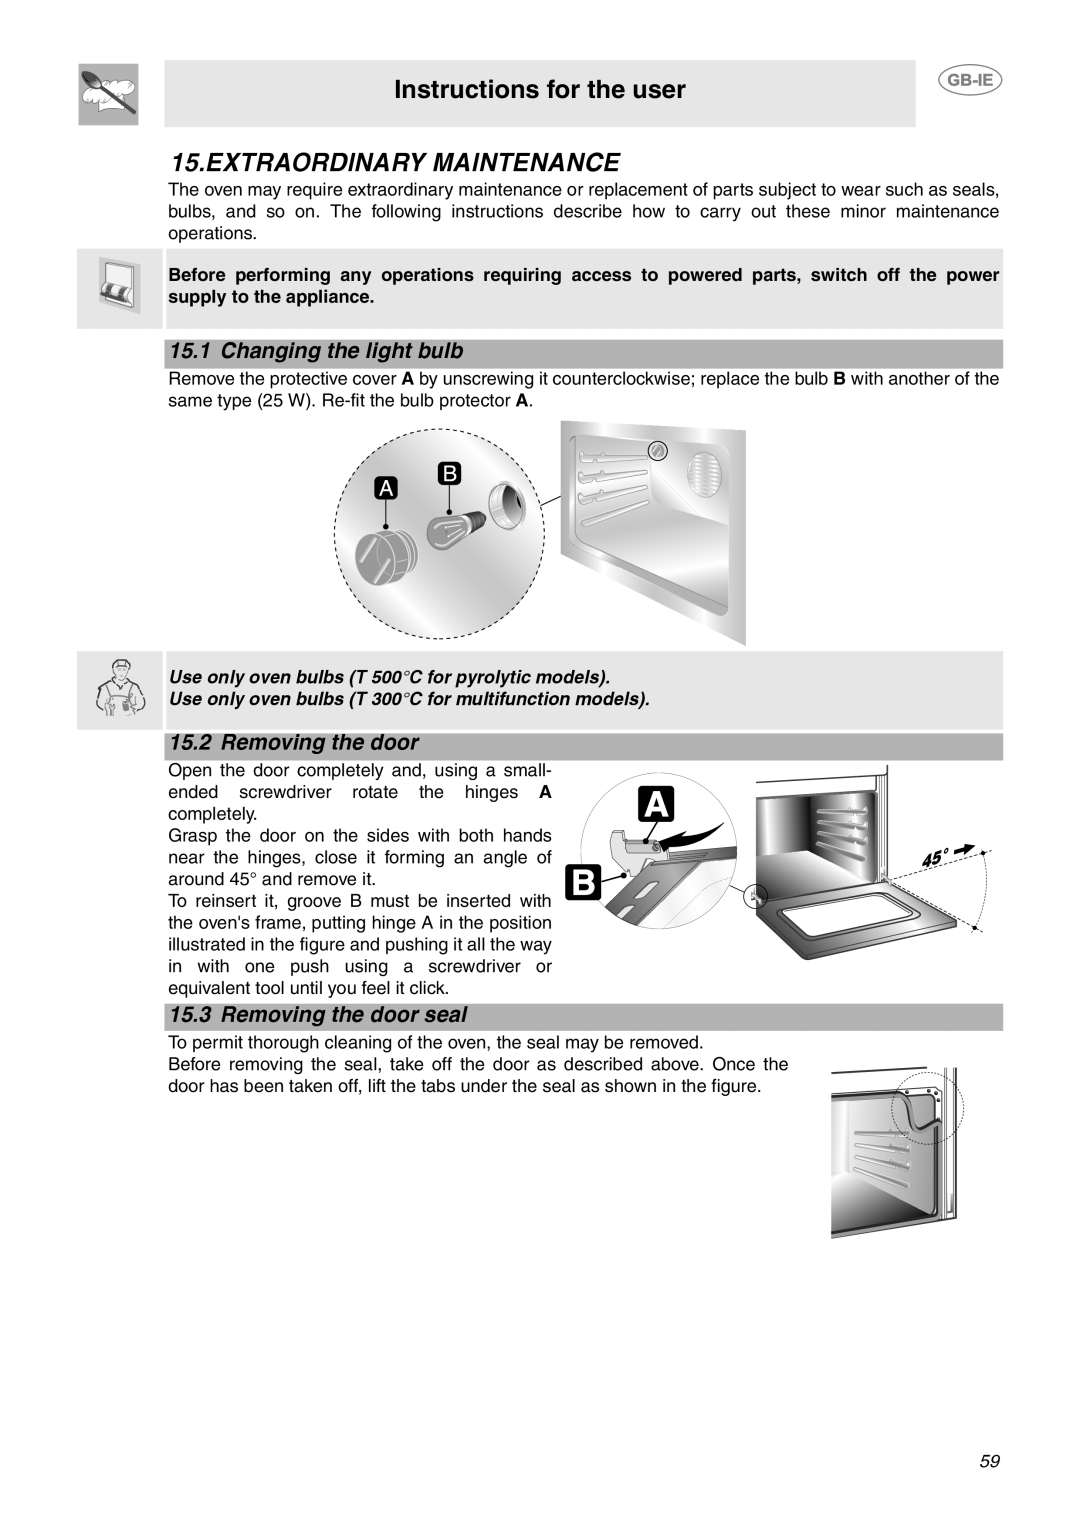 Smeg CE92IPX Extraordinary Maintenance, Changing the light bulb, Removing the door seal, Instructions for the user 